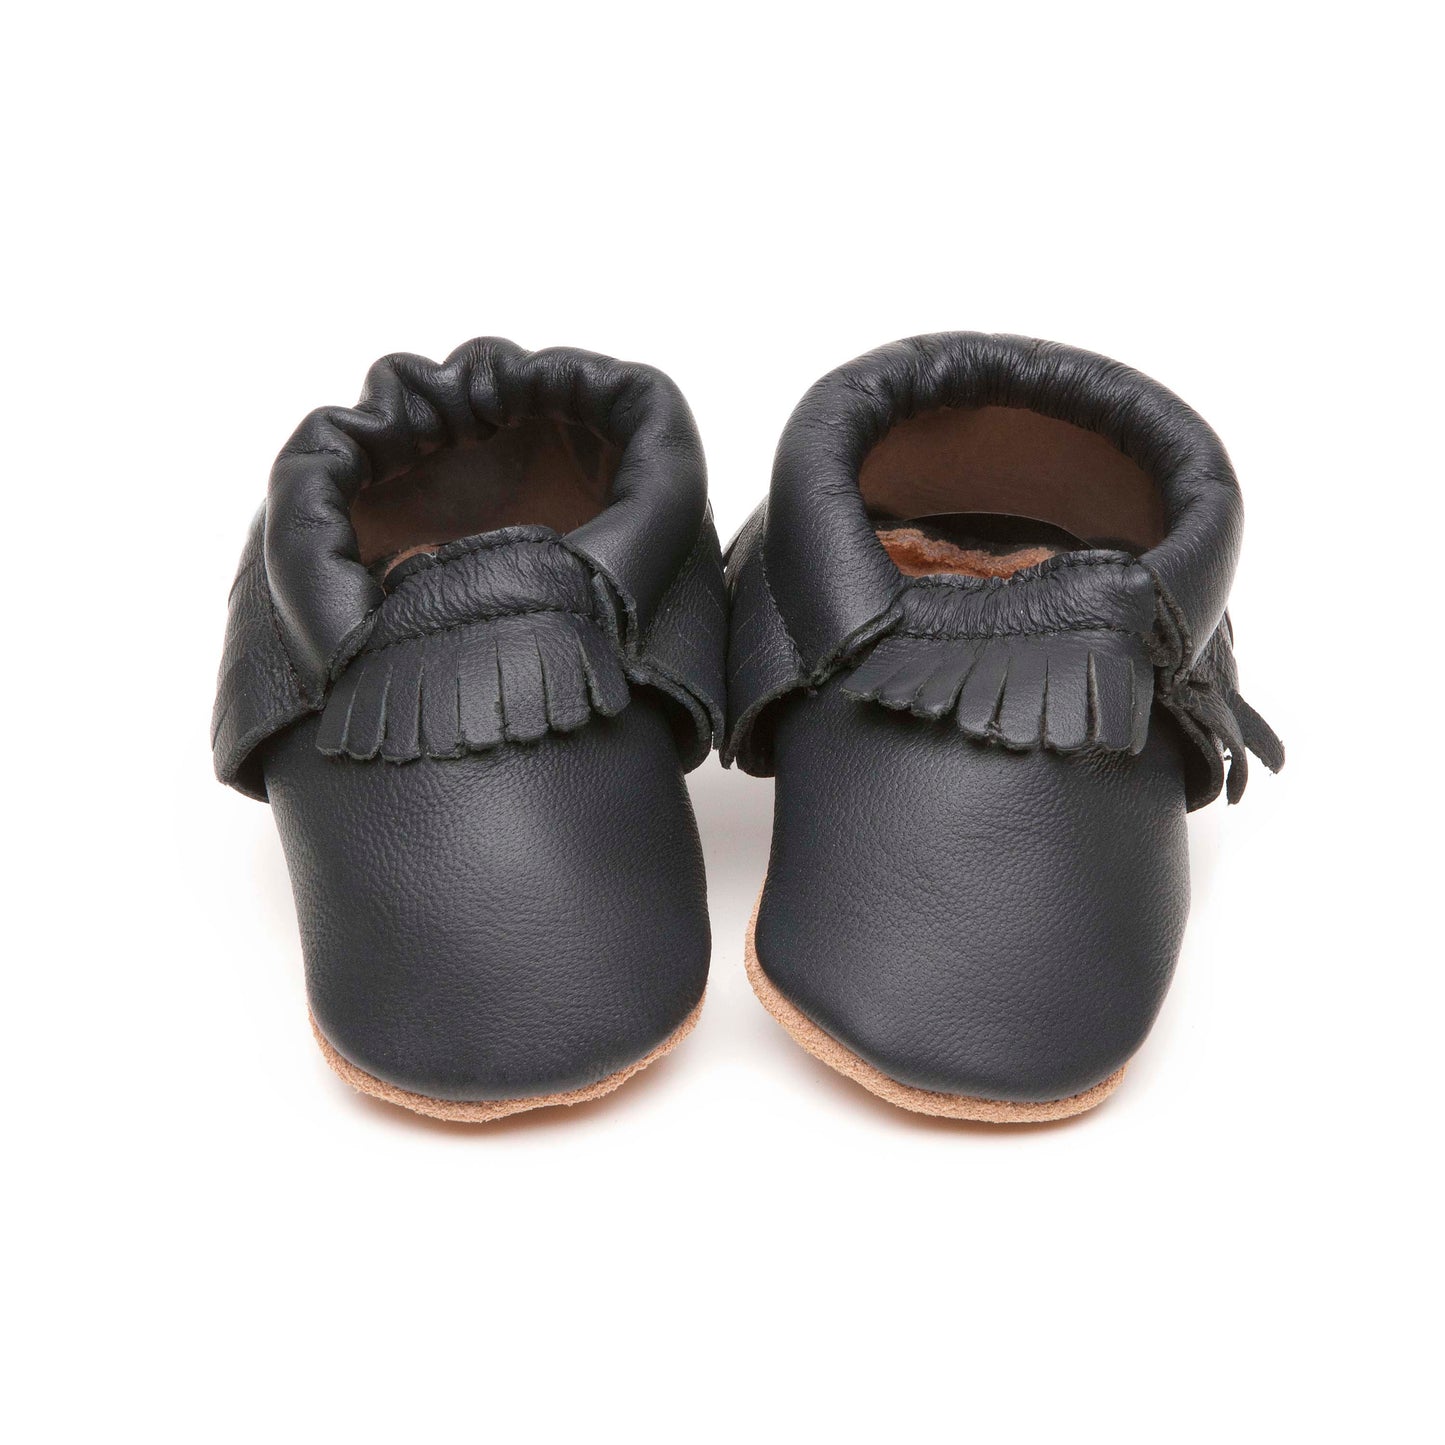 Moccasins Soft Baby Shoes Black